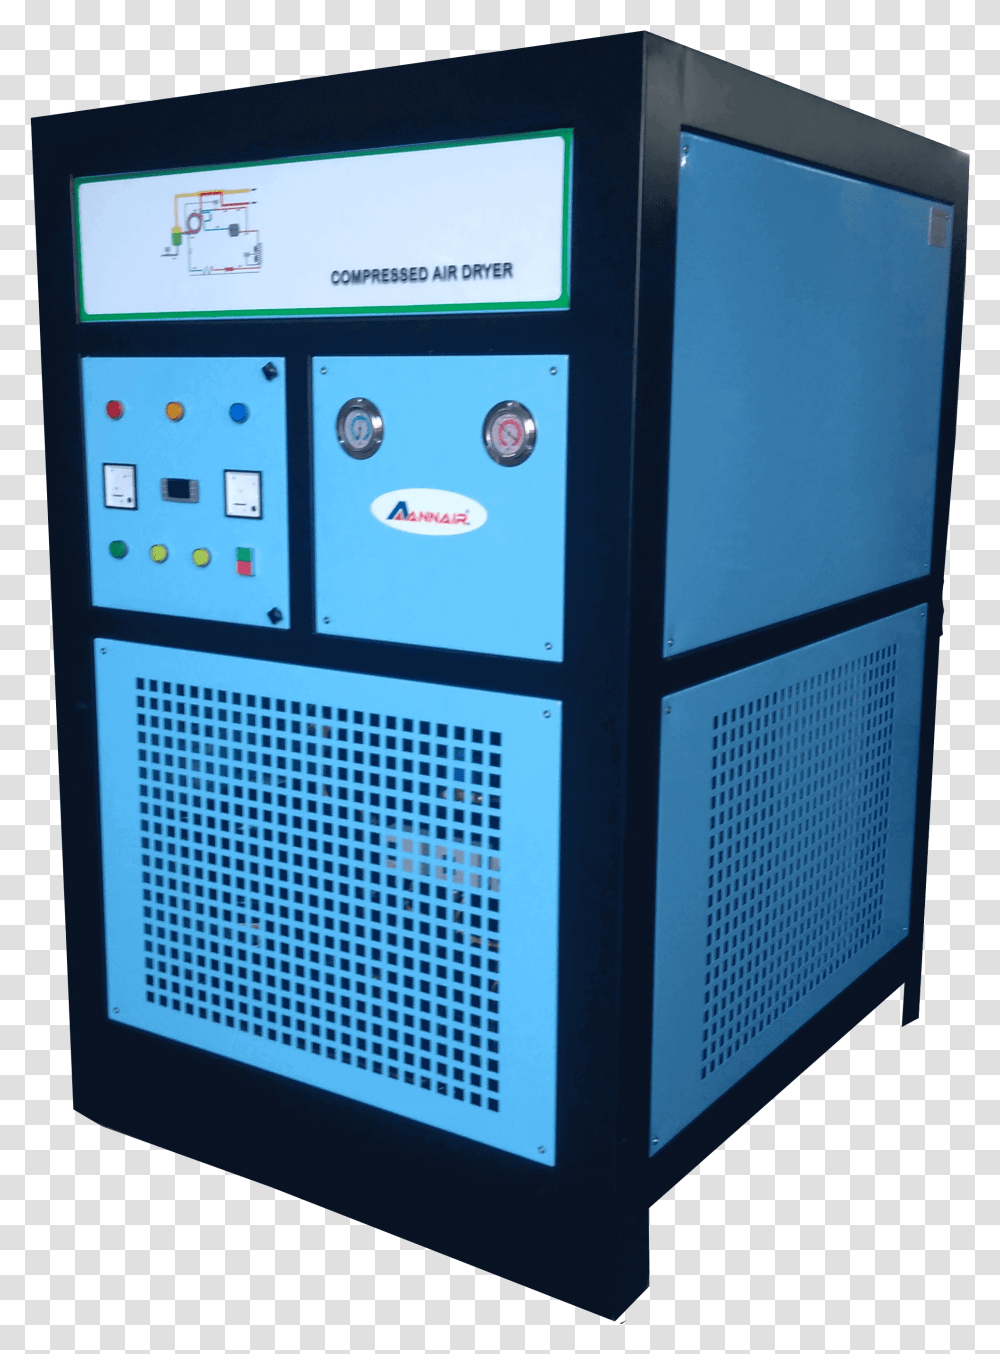 Refrigerated Air Dryer In Thane Annair Gold Star Series Vertical, Kiosk, Machine, Leisure Activities, Text Transparent Png